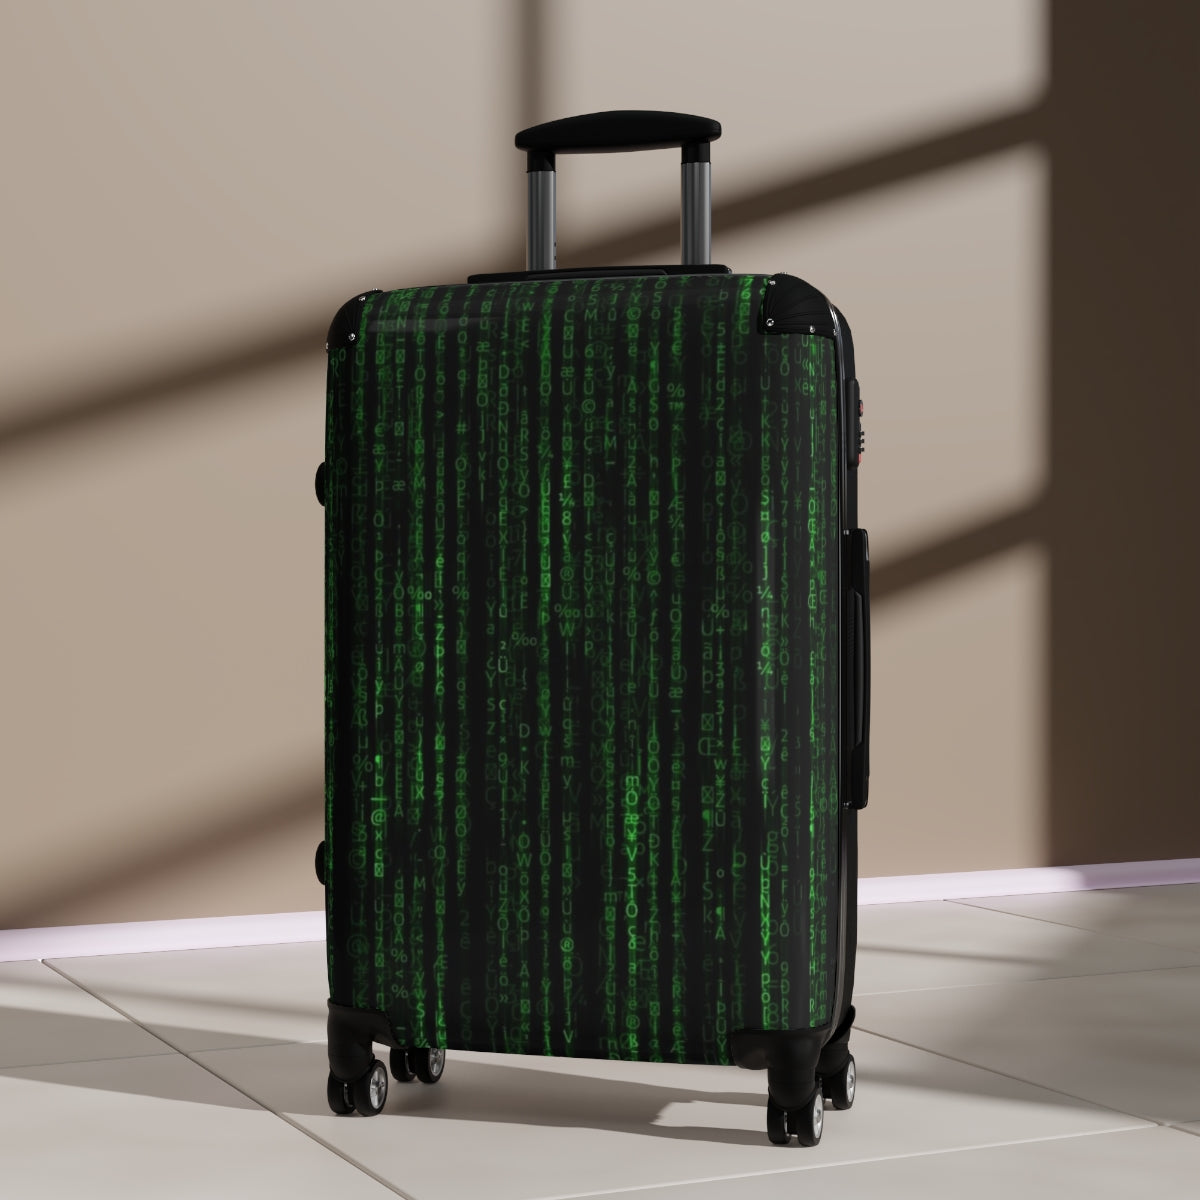 Getrott The Matrix Reloaded Resurrections Revolutions Trilogy Matrixmovies Glitch in the Matrix Animatrix Keanu Reeves World Classic Poster Black Cabin Suitcase Carry-On Travel Check Luggage 4-Wheel Spinner Suitcase Bag Multiple Colors and Sizes